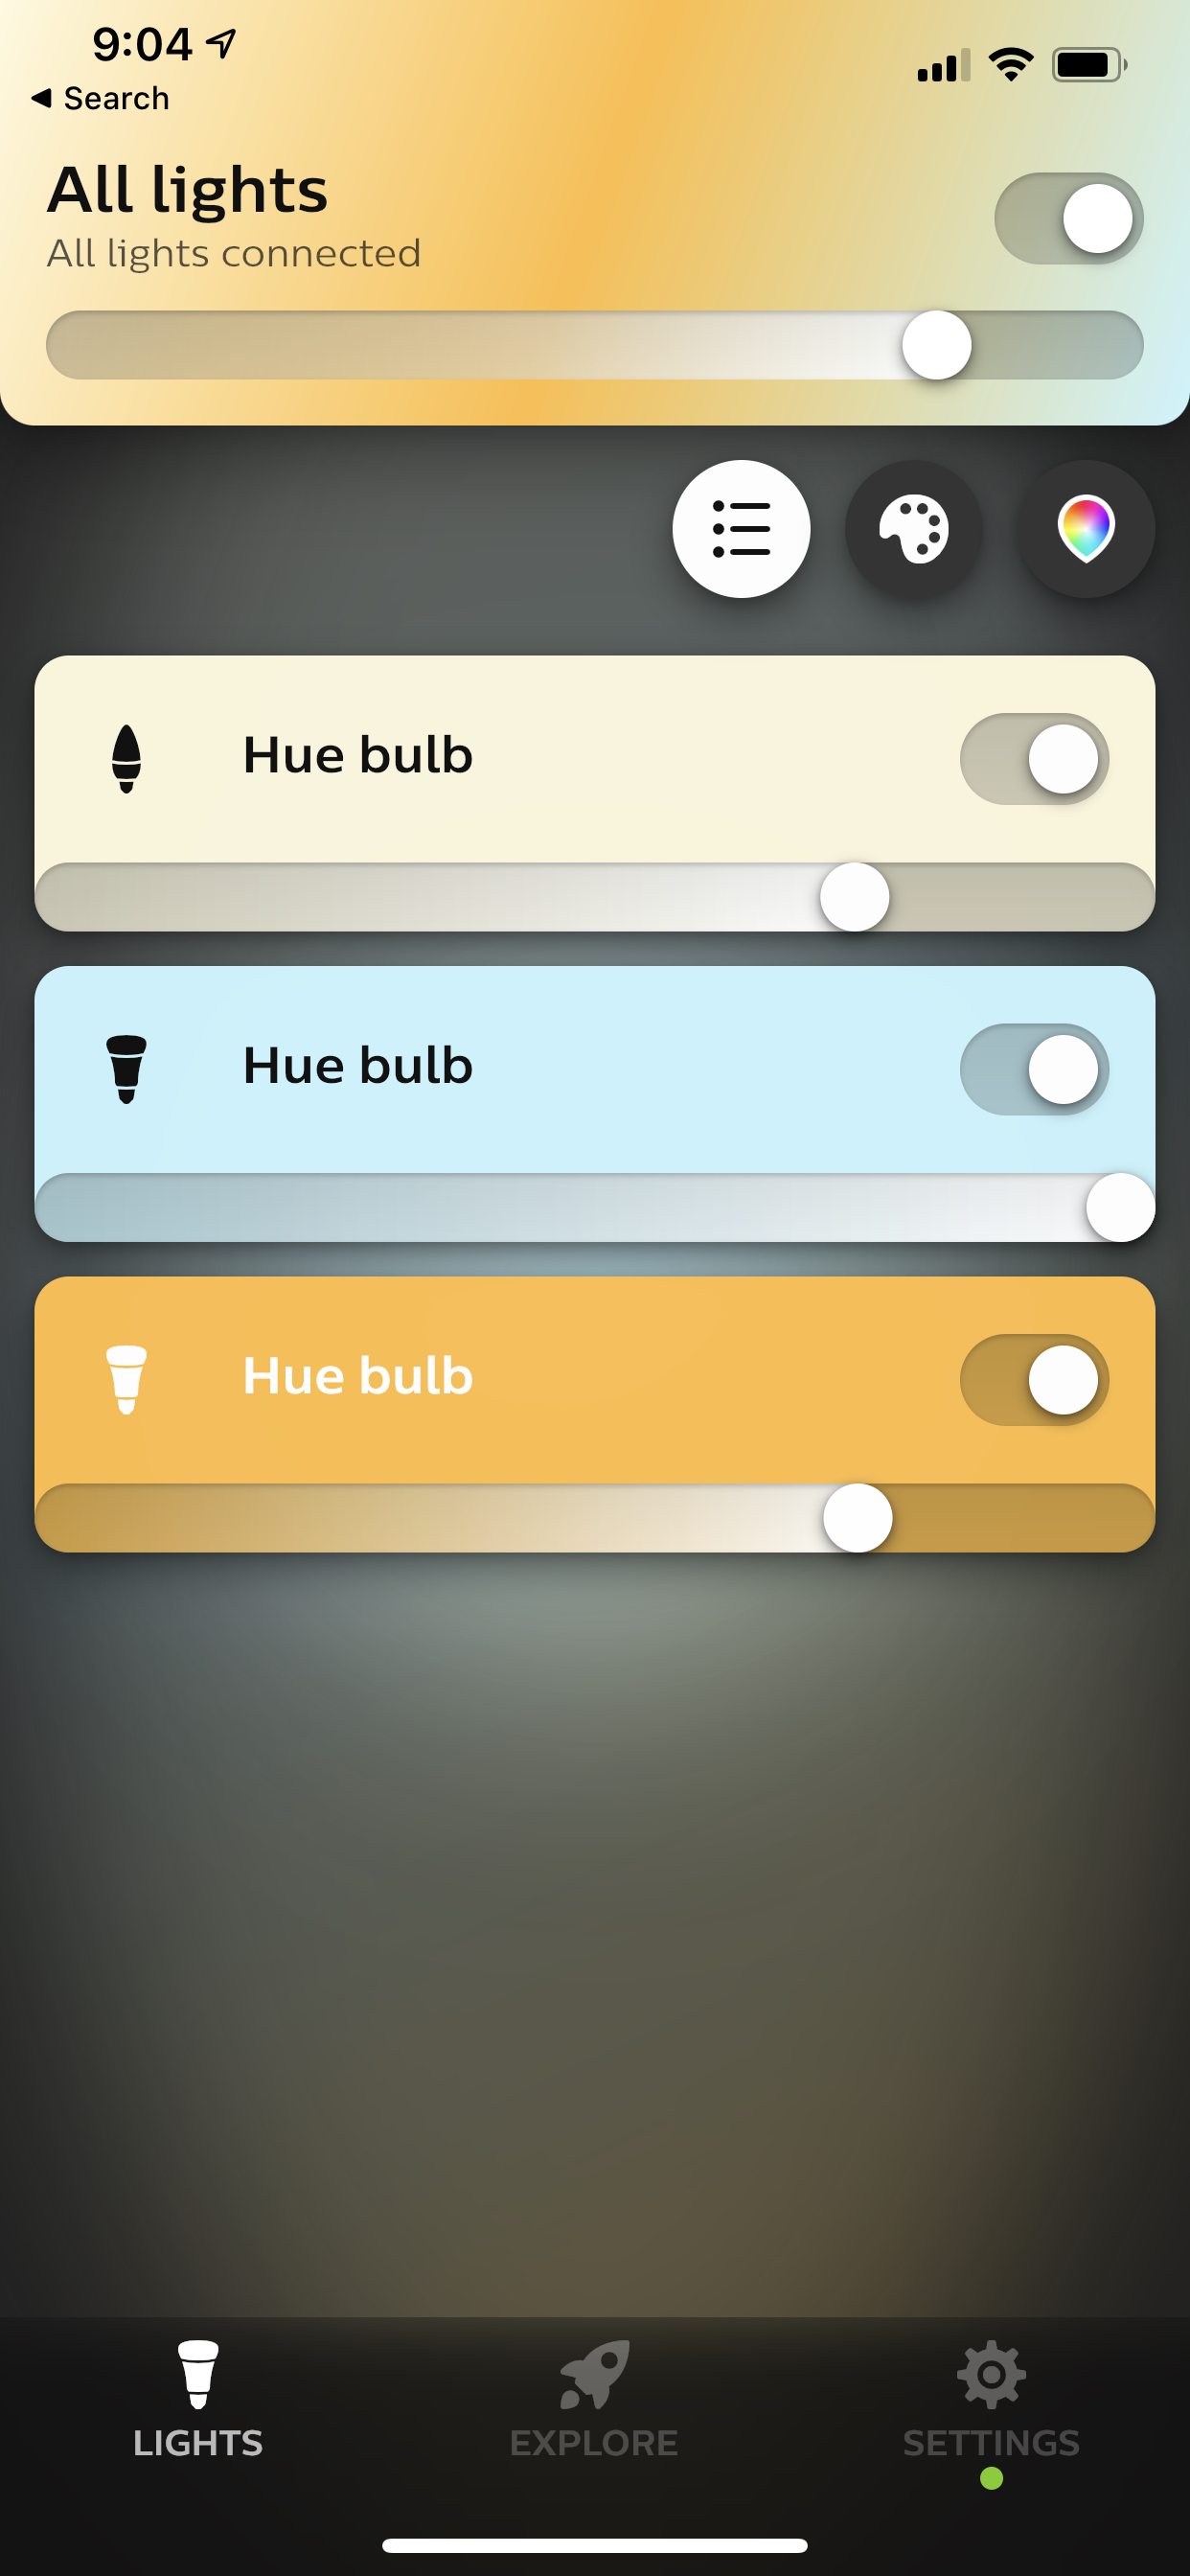 Philips Hue Bluetooth, lights, review